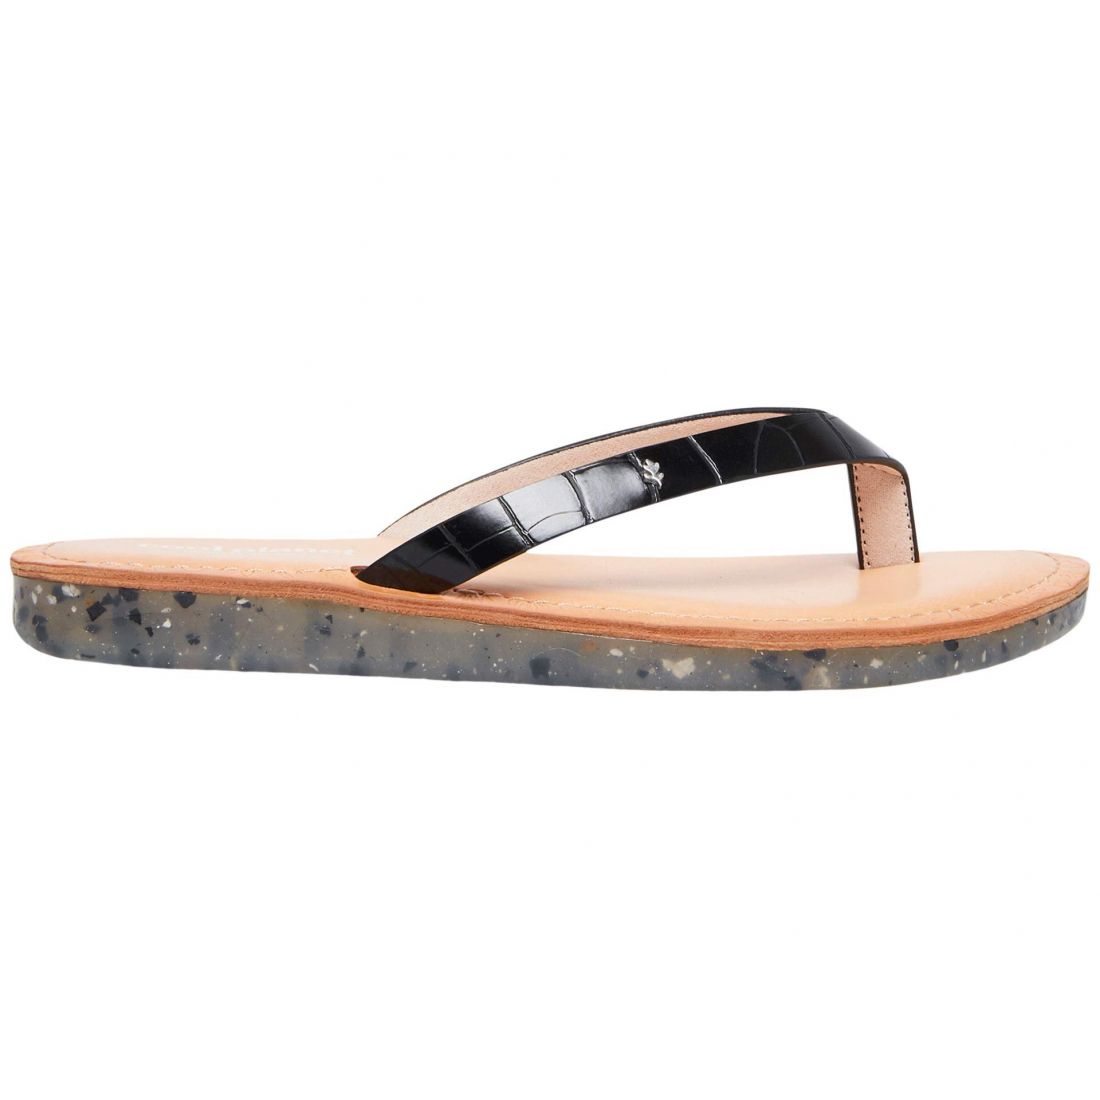 Cool Planet by Steve Madden - Tongs 'Planet' pour Femmes